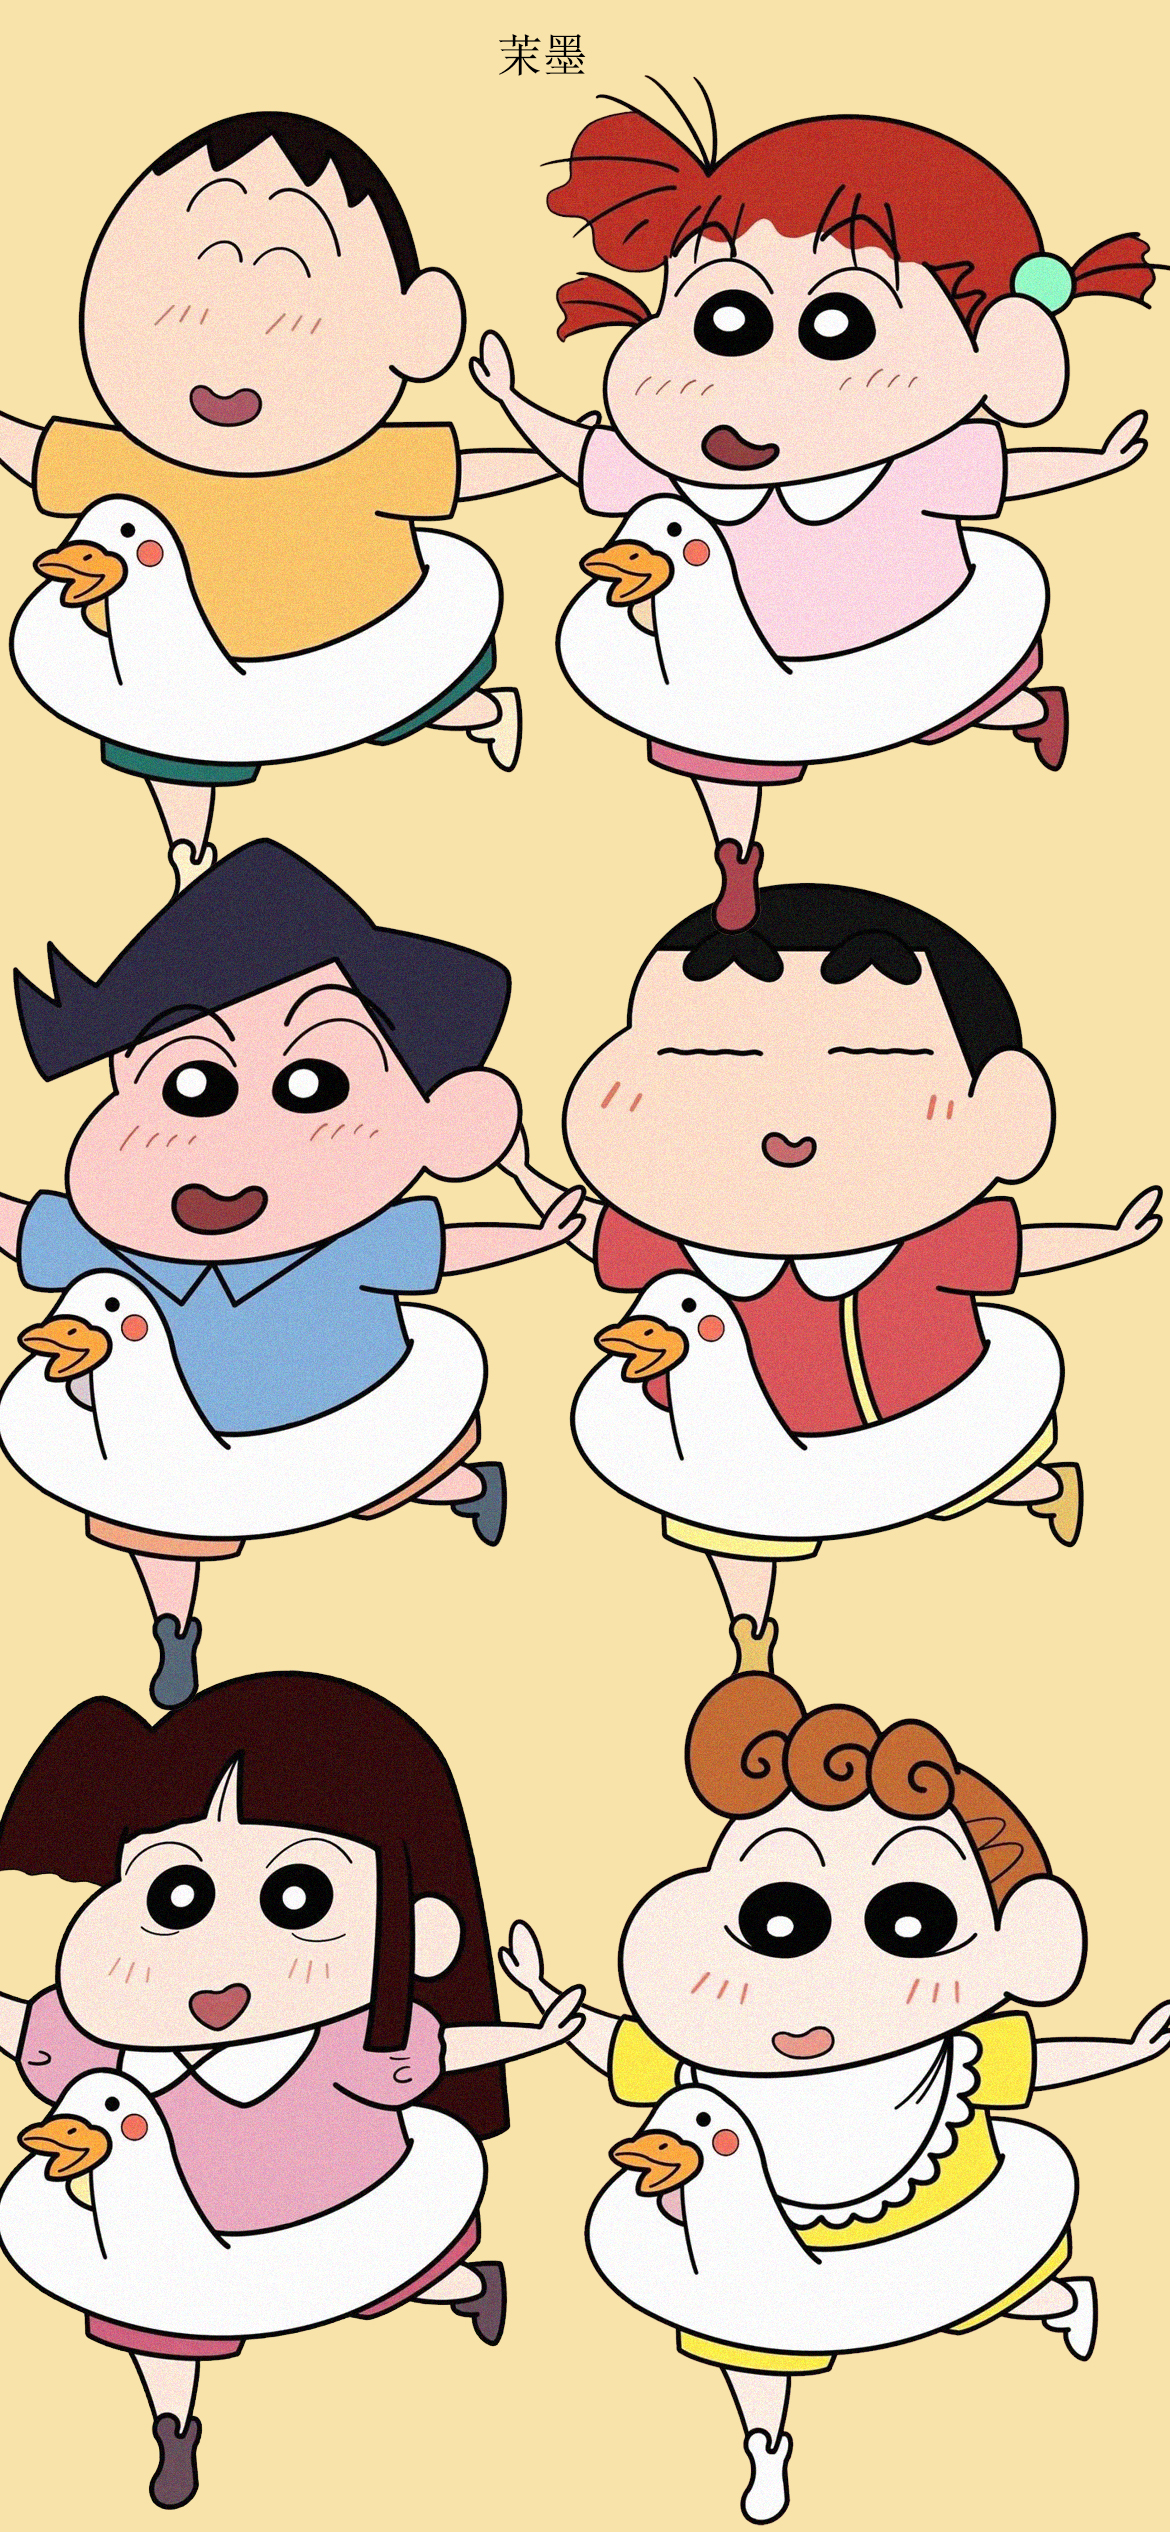 Shin Chan and friends on the compas : r/PoliticalCompassMemes